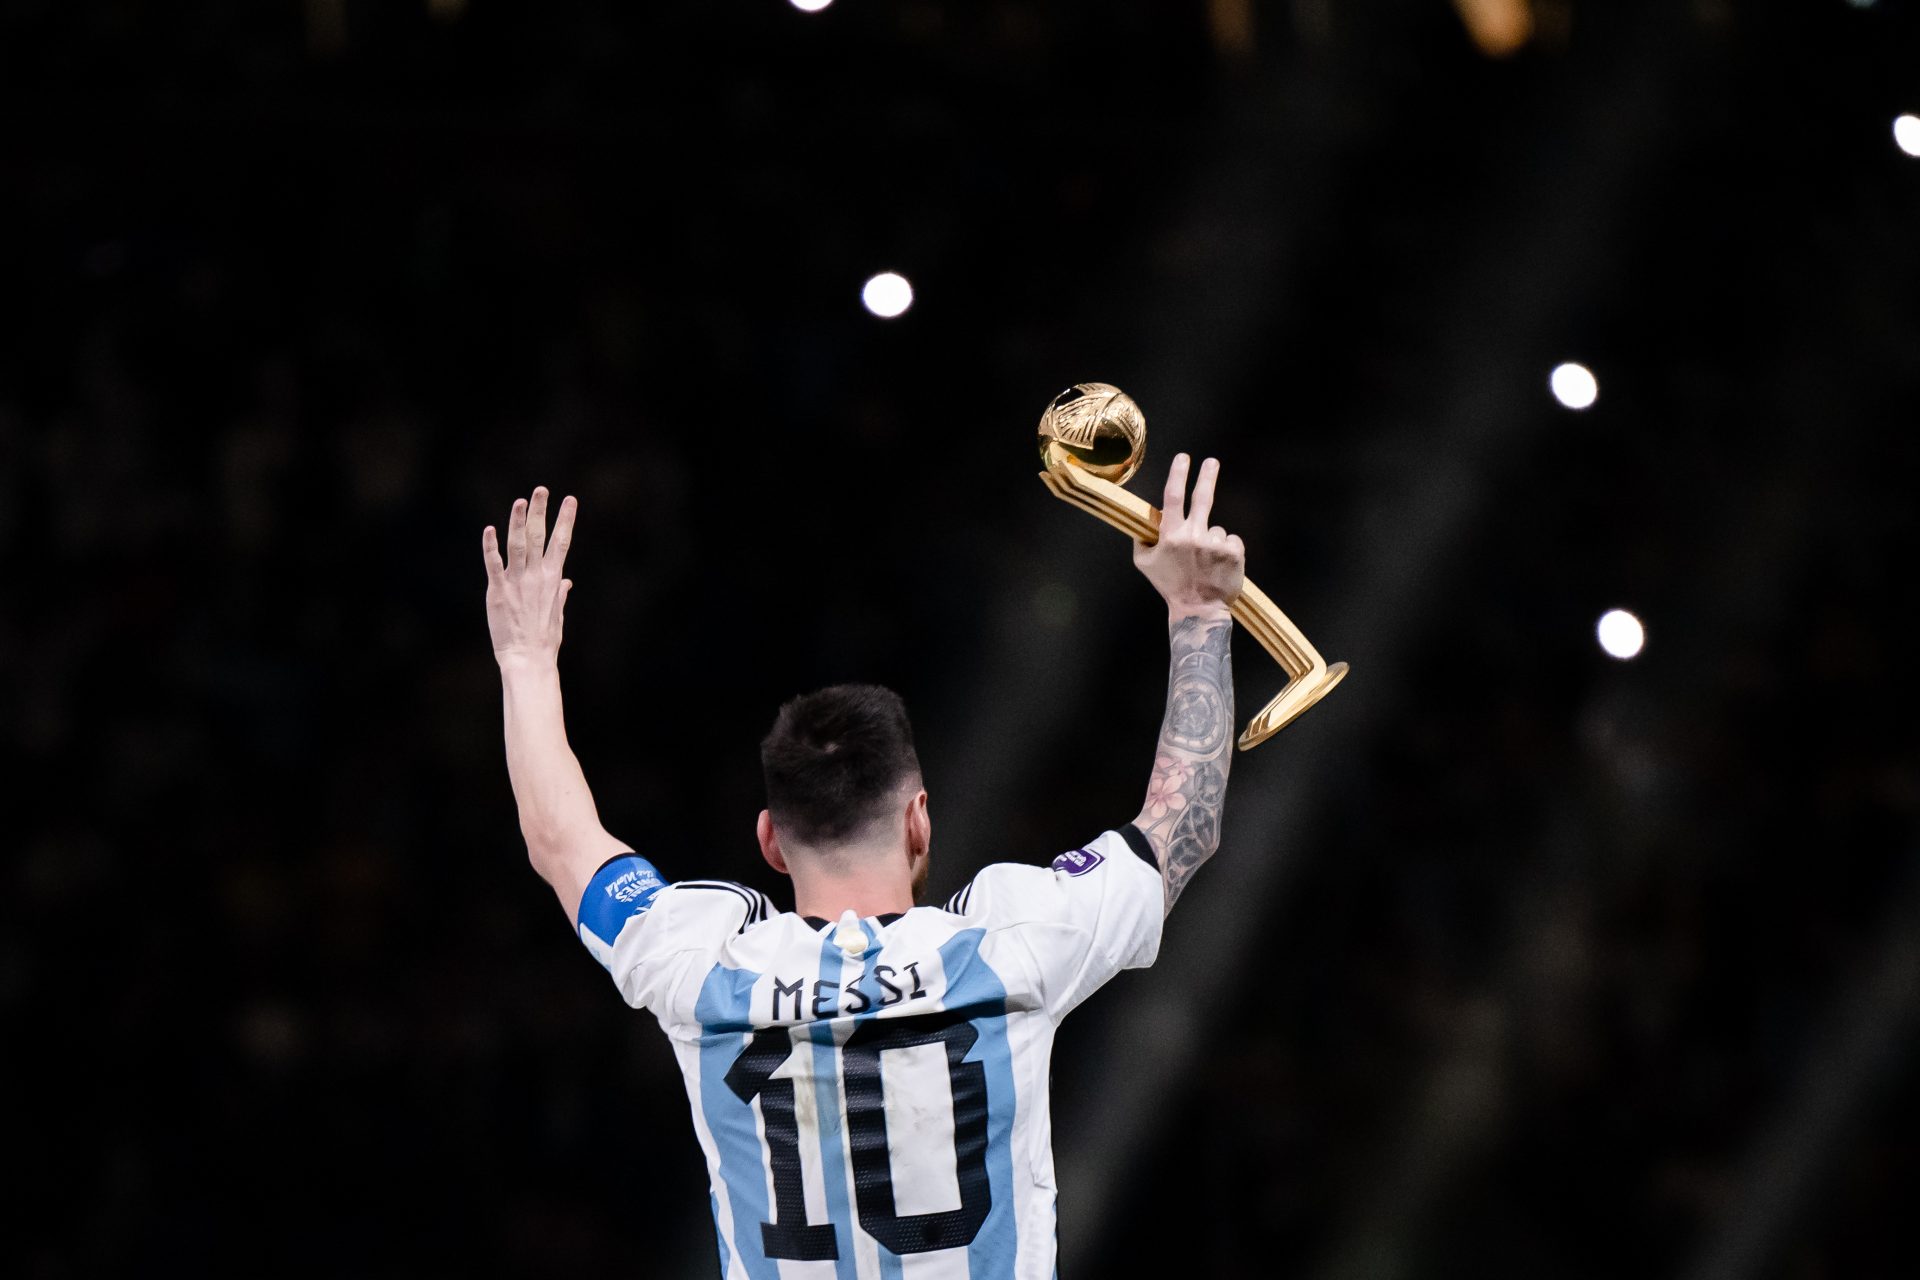 Messi’s World Cup Final shirt sells for $7.8 million...but still isn’t the most expensive shirt of all time?